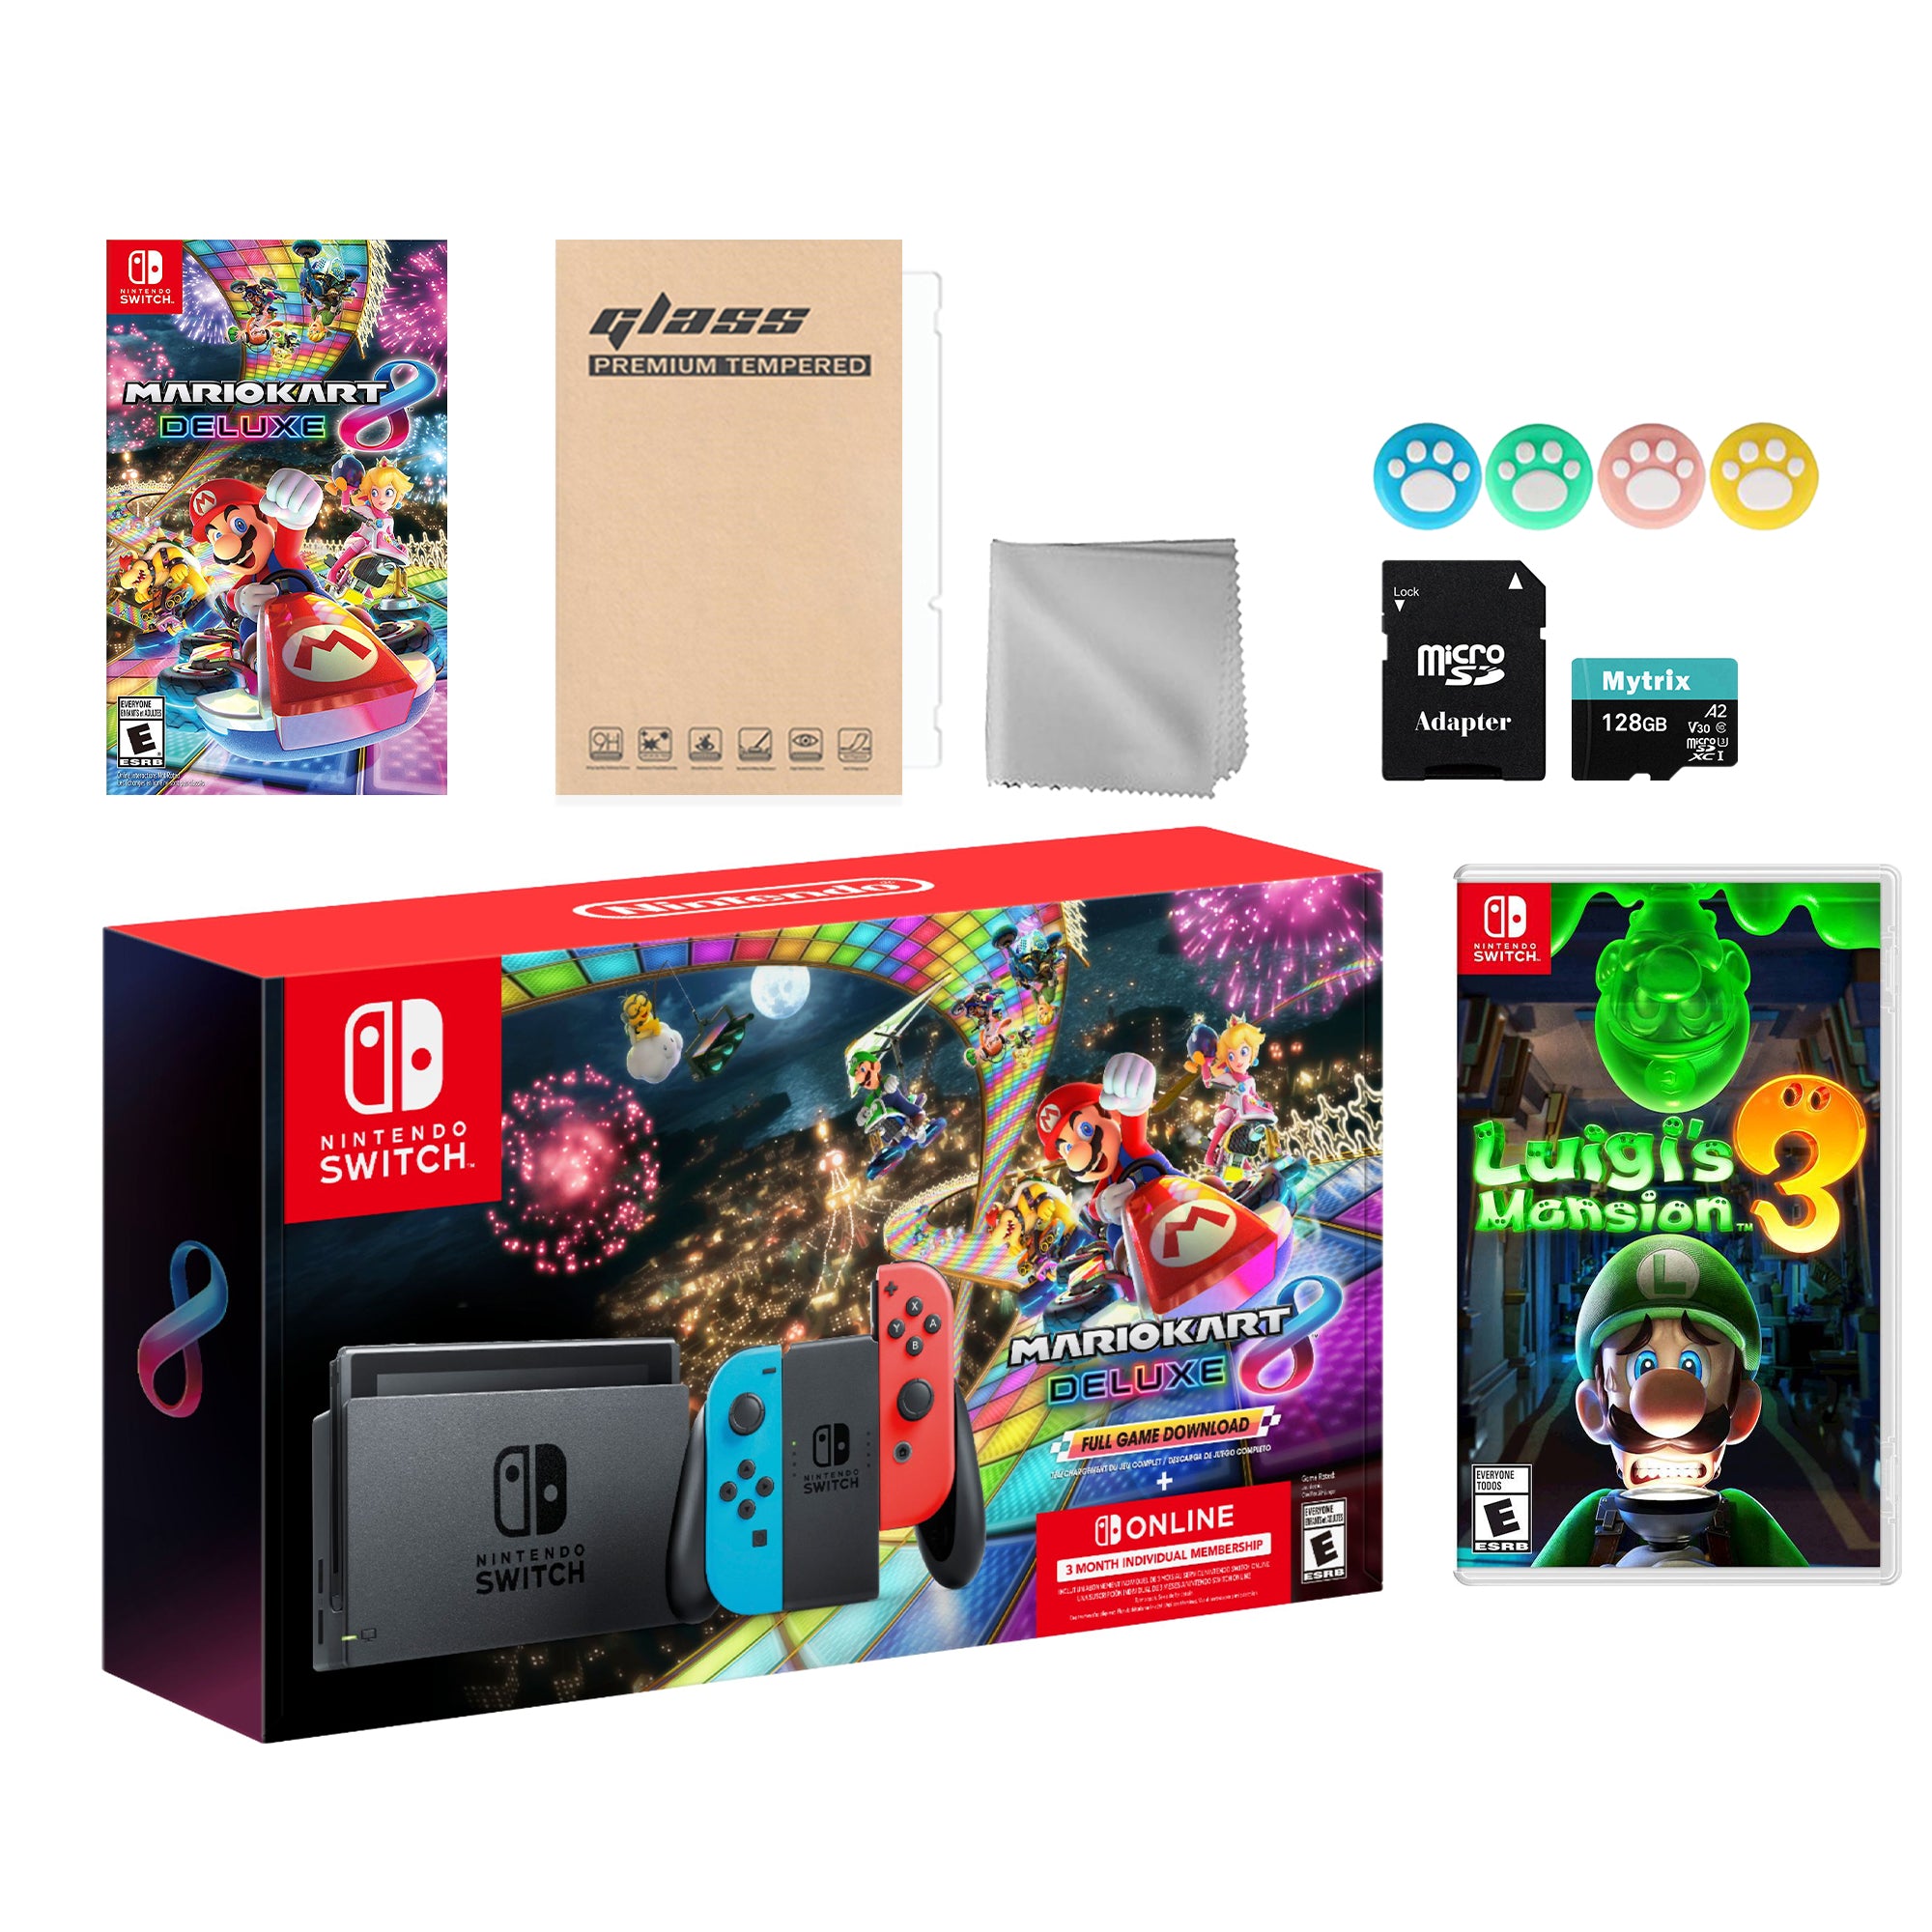 Nintendo Switch Mario Kart 8 Deluxe Bundle: Red Blue Console, Mario Kart 8 & Membership, Luigi's Mansion 3, Mytrix 128GB MicroSD Card and Accessories